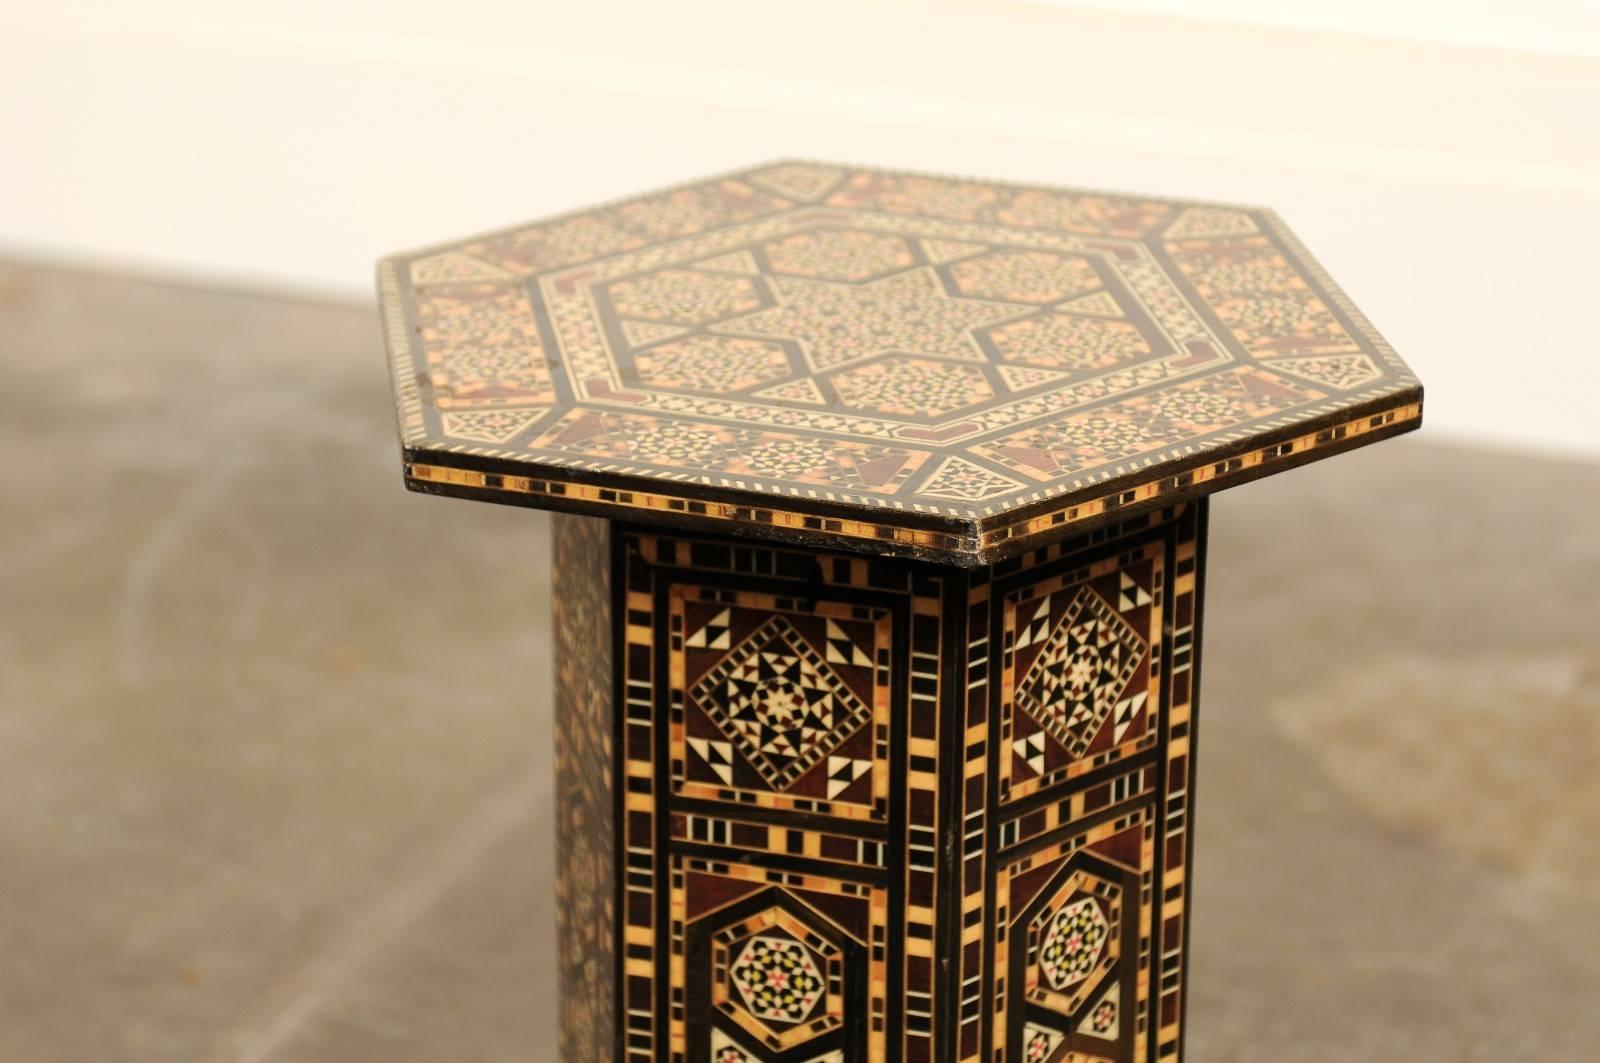 20th Century Inlaid Moroccan Petite Size Drinks Table with Wood and Bone Inlay, Mid-Century